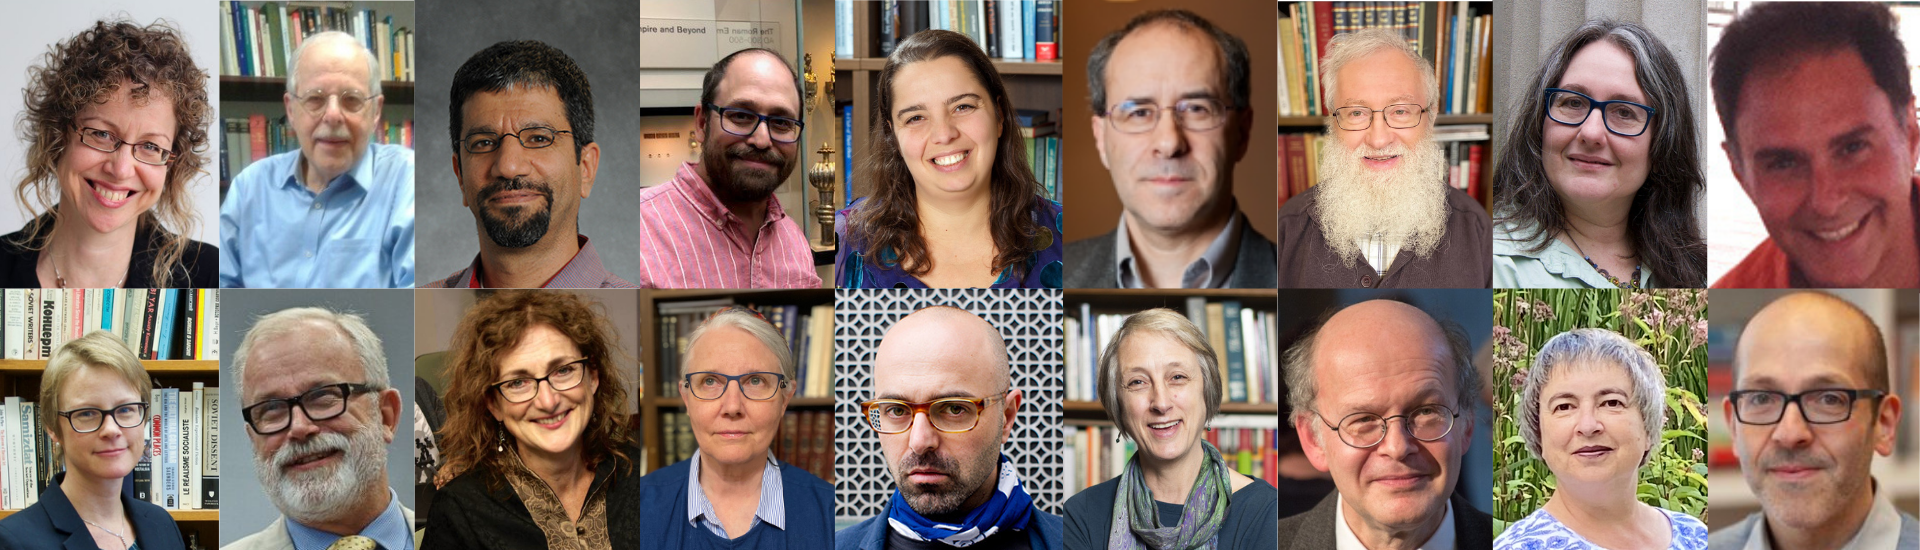 Headshots of 18 diverse faculty members affiliated with the ATCJS 